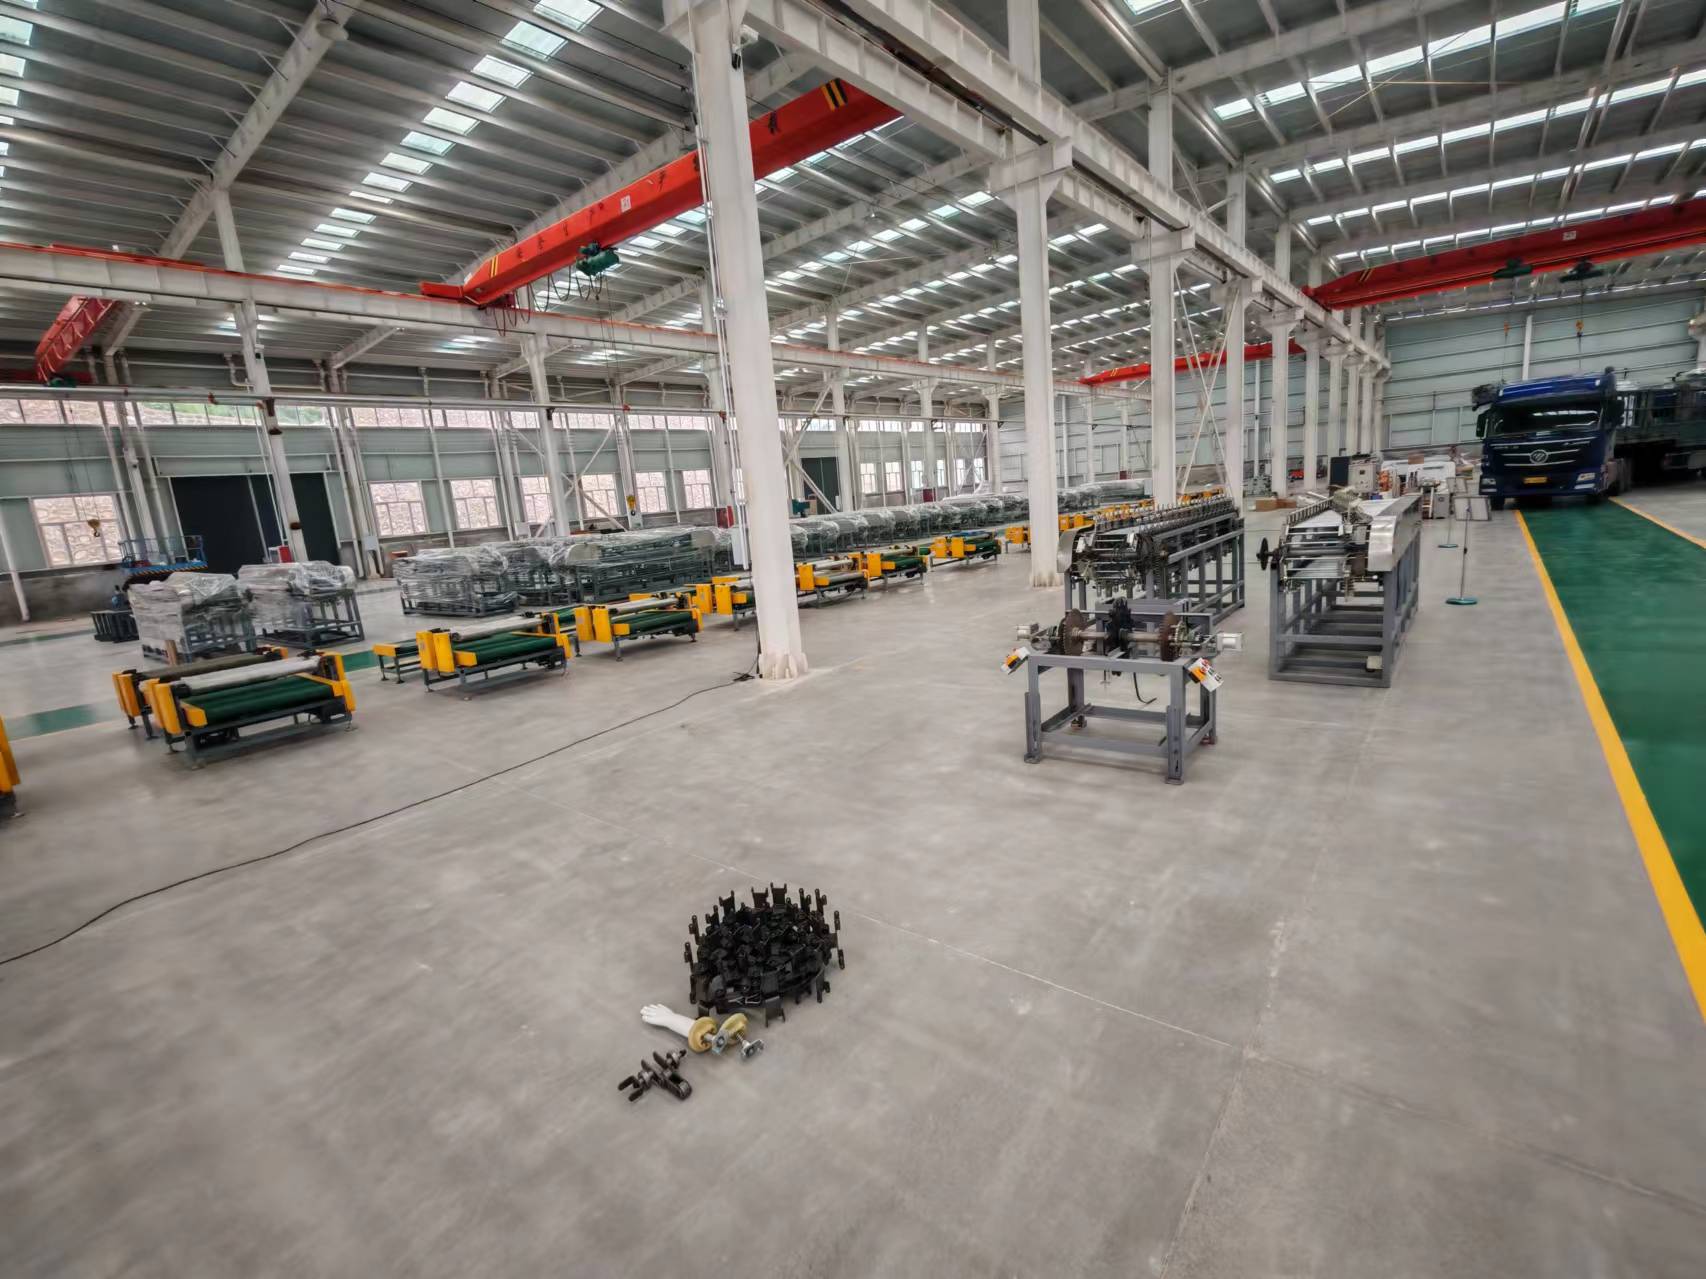 The relocation of Fengwang Technology Company's new factory is currently underway